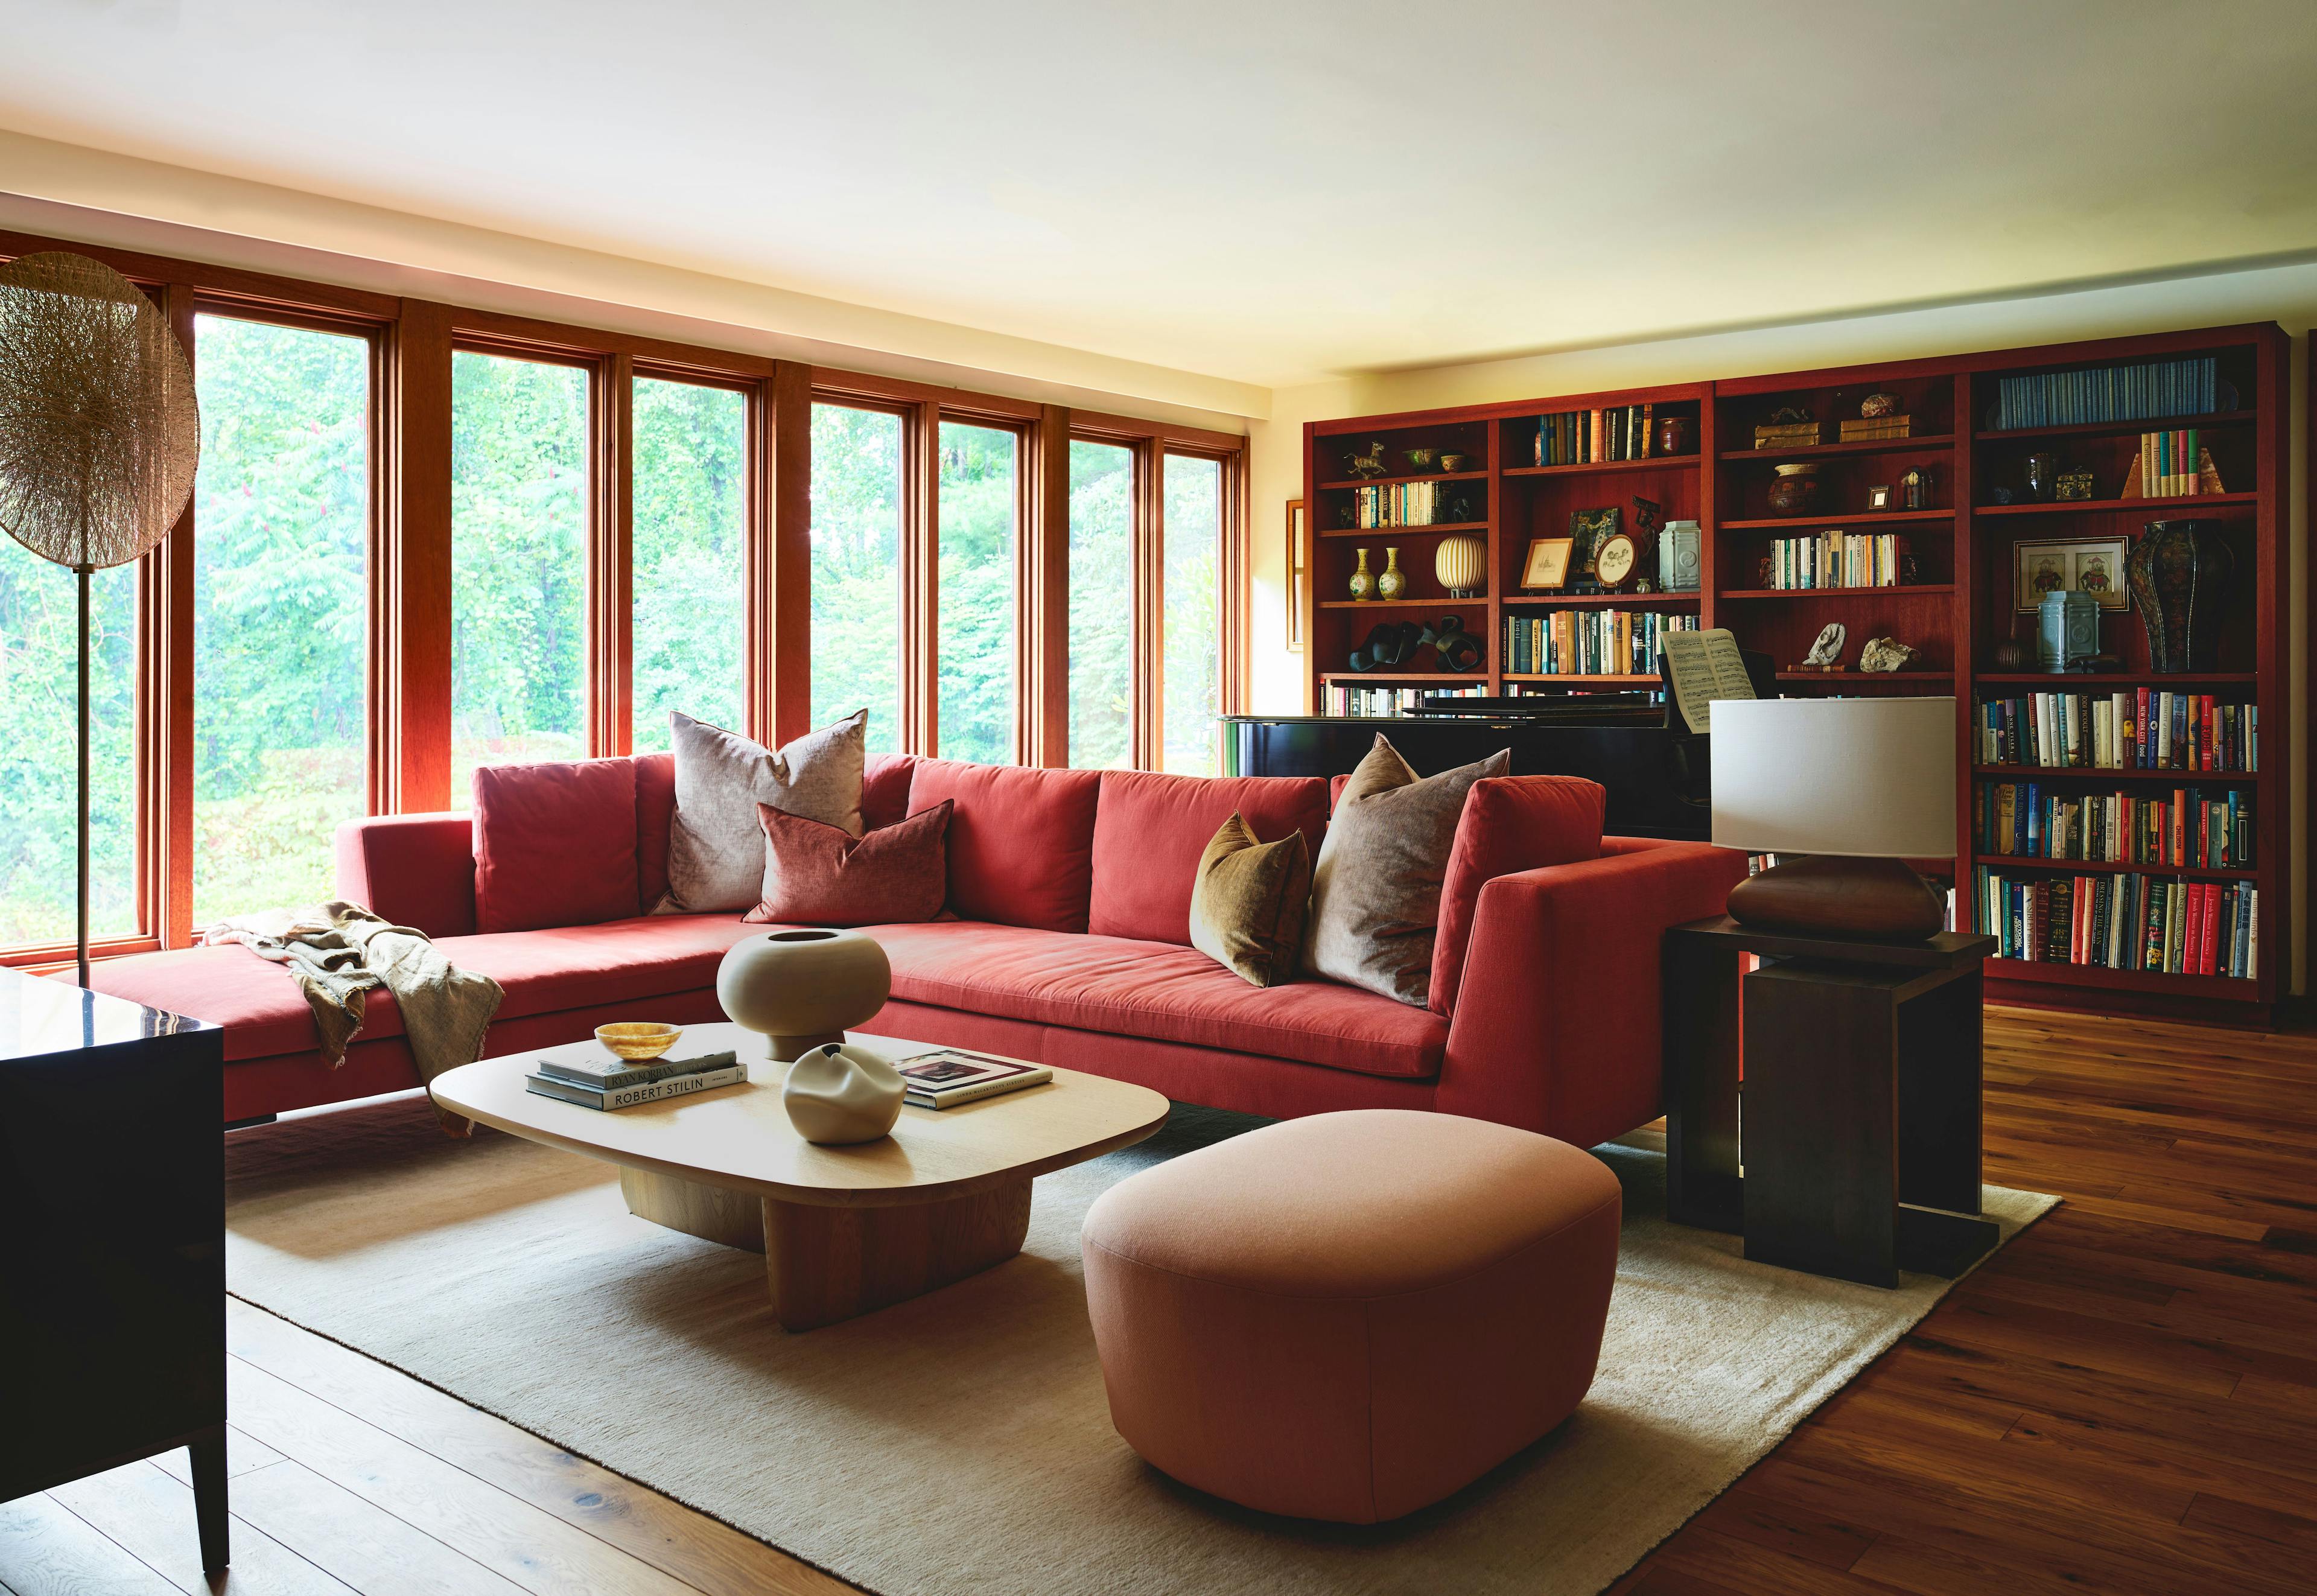 A living room with a red couch and a coffee table in the Amherst Residence, blending old antiques with contemporary pieces in a mountain landscape setting.